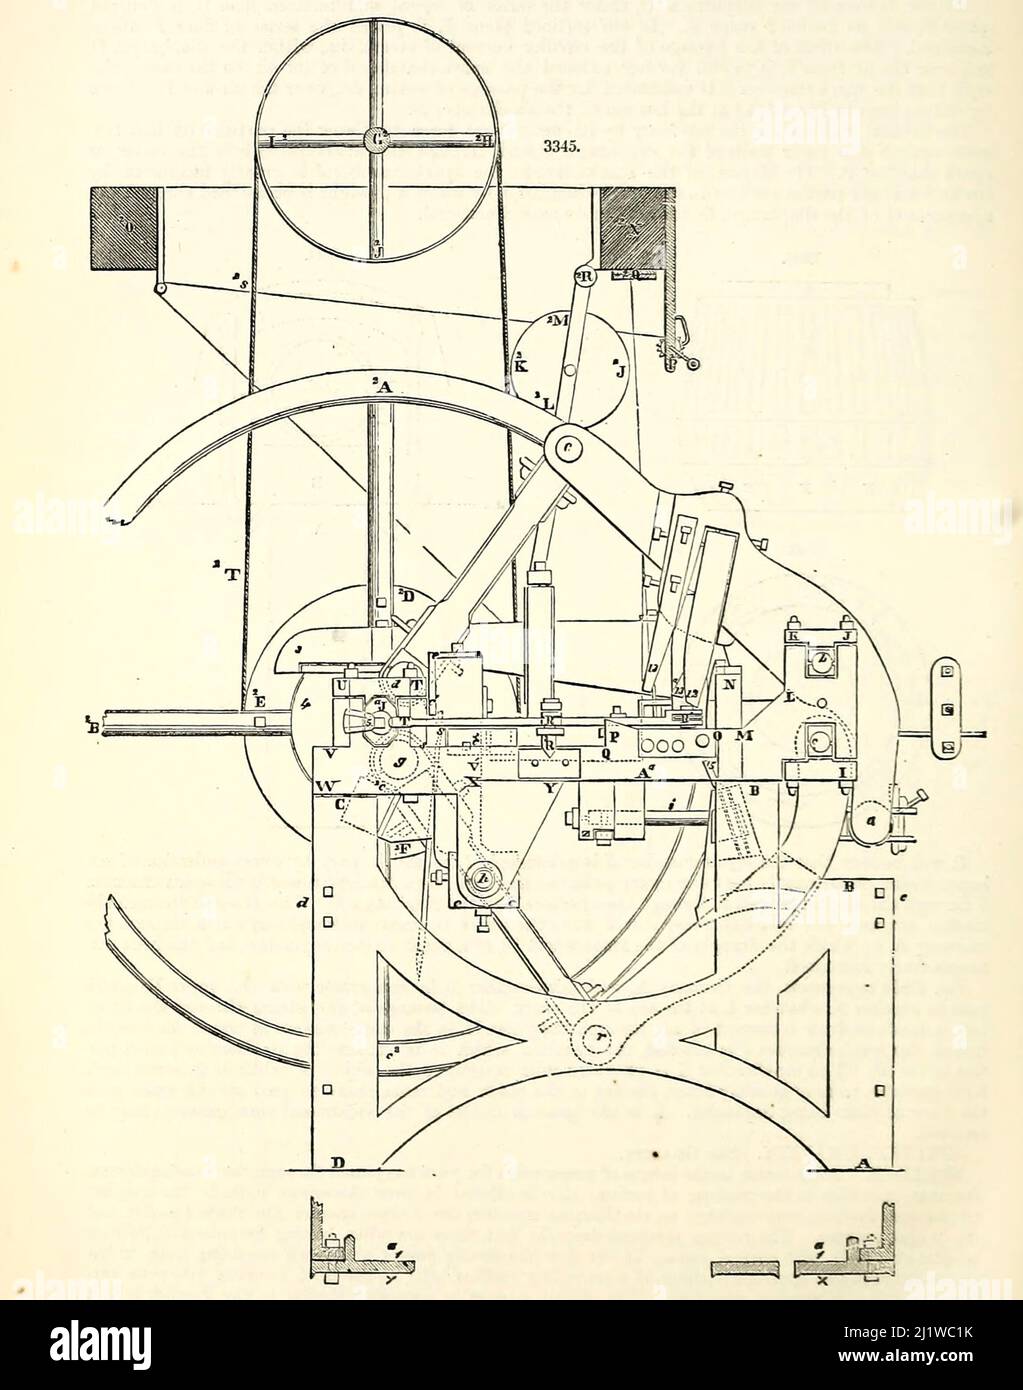 SHINGLER,  BURDEN'S  PATENT from Appleton's dictionary of machines, mechanics, engine-work, and engineering : illustrated with four thousand engravings on wood ; in two volumes by D. Appleton and Company Published New York : D. Appleton and Co 1873 Stock Photo